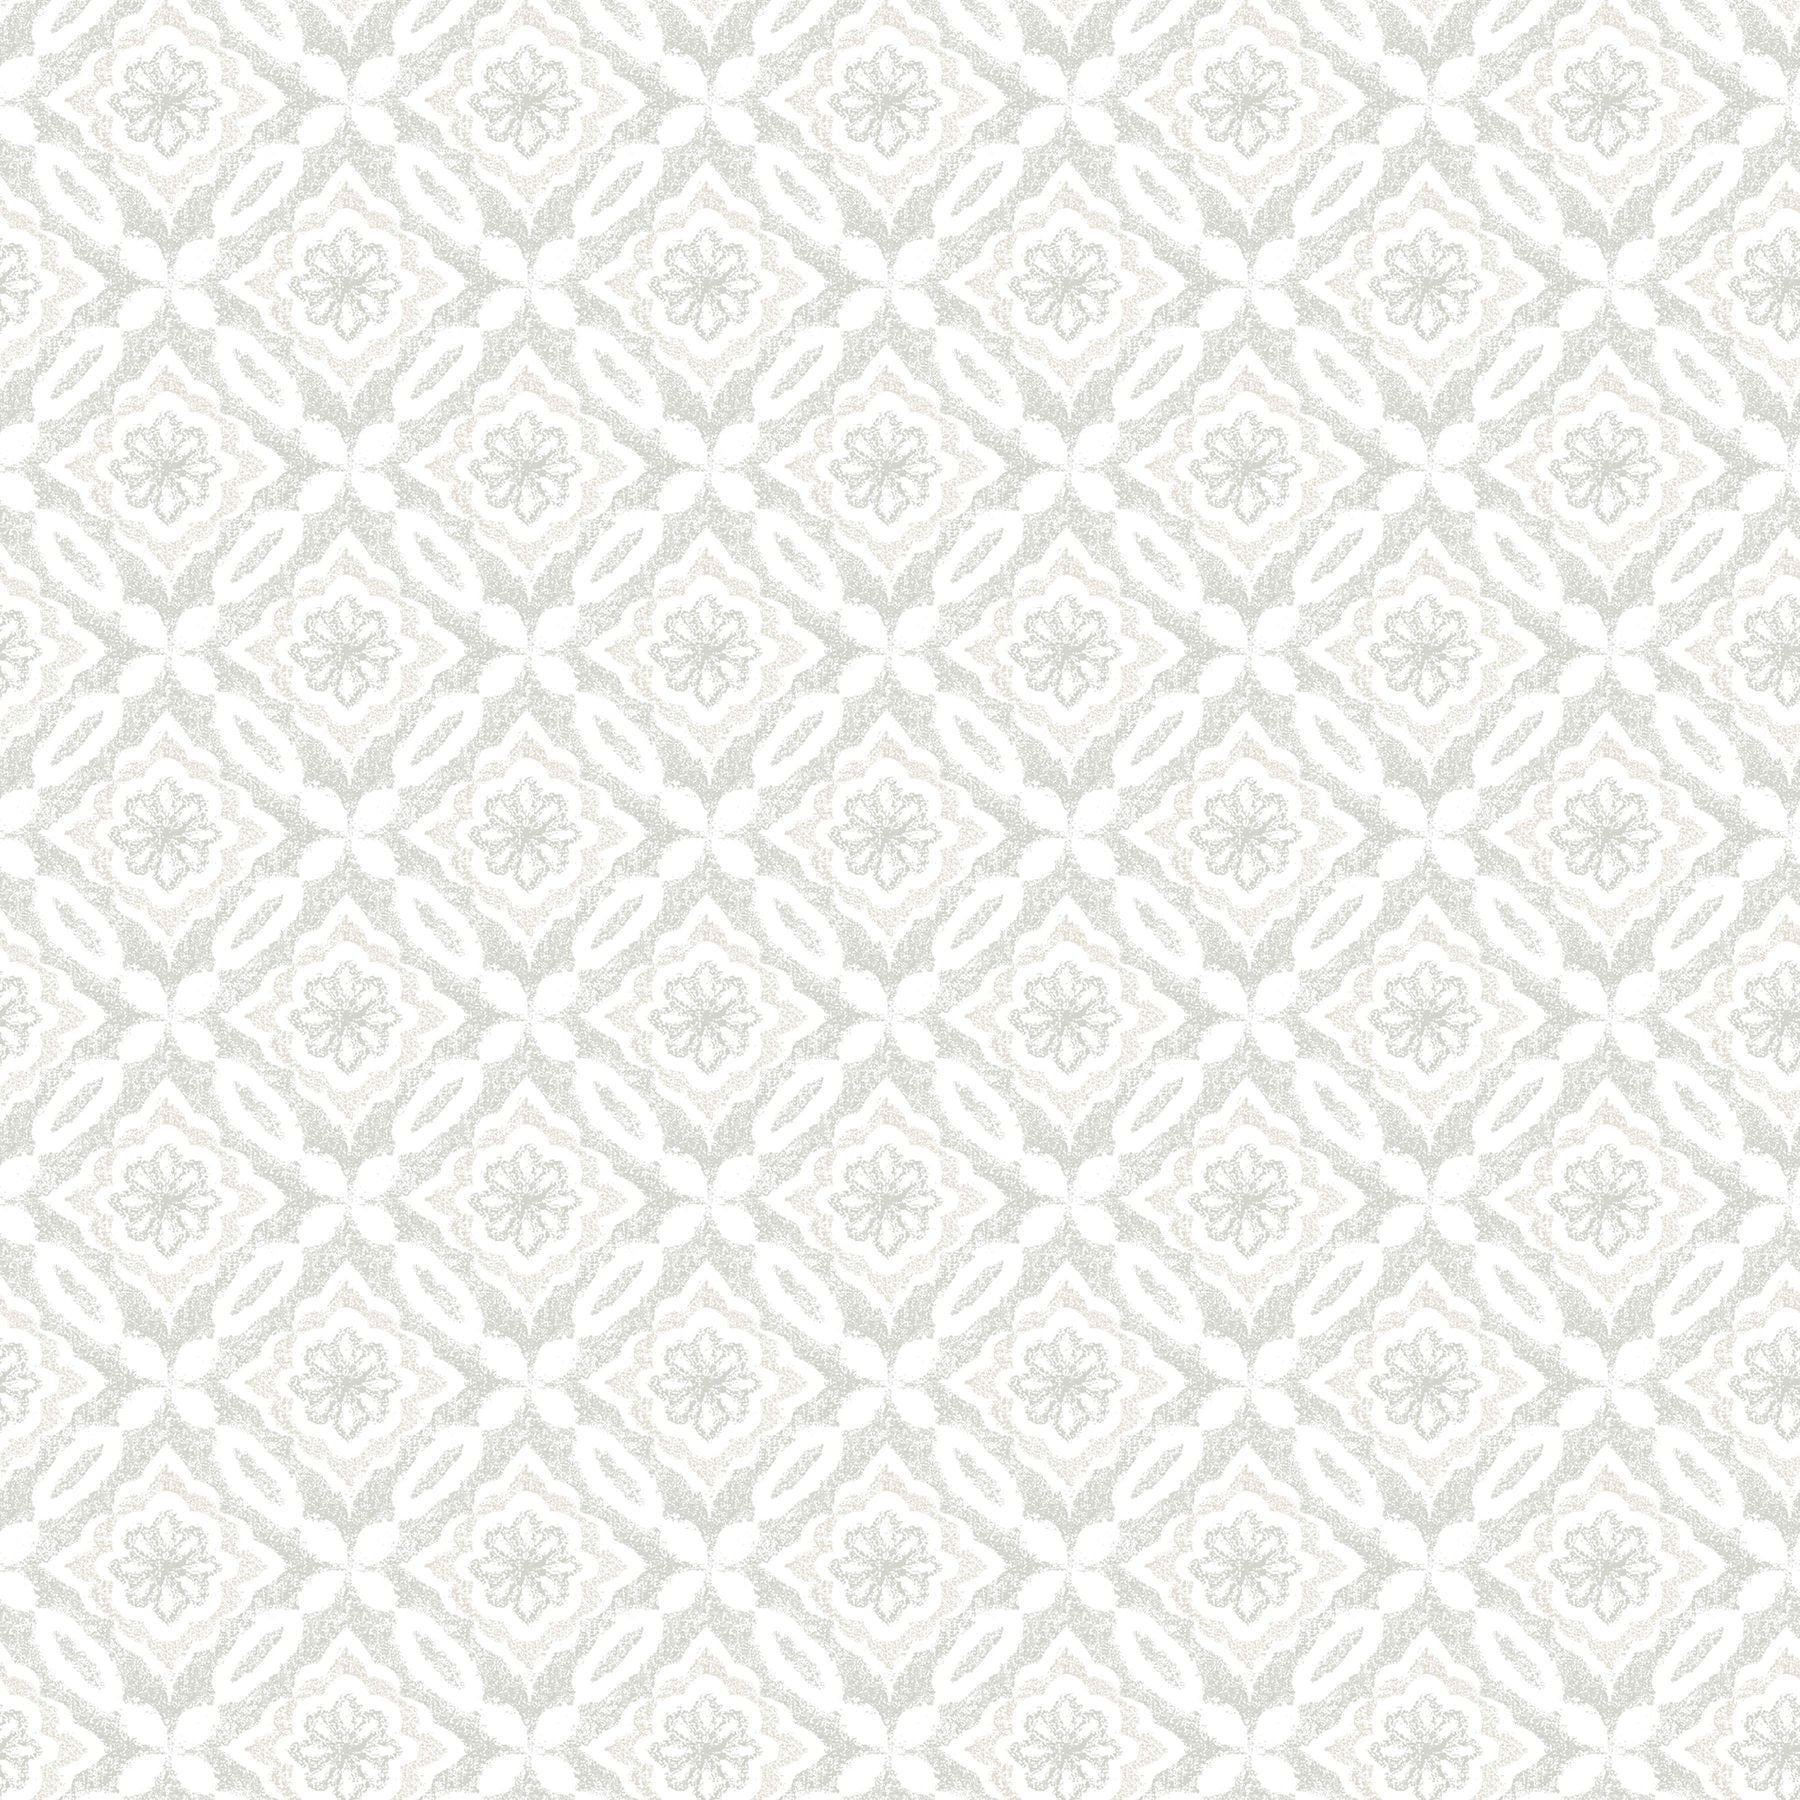 3122-10700 Hugson Quilted Damask Wallpaper with Homespun Pattern in Grey  Neutral Off White Colors Farmhouse Style Prepasted Acrylic Coated Paper -  